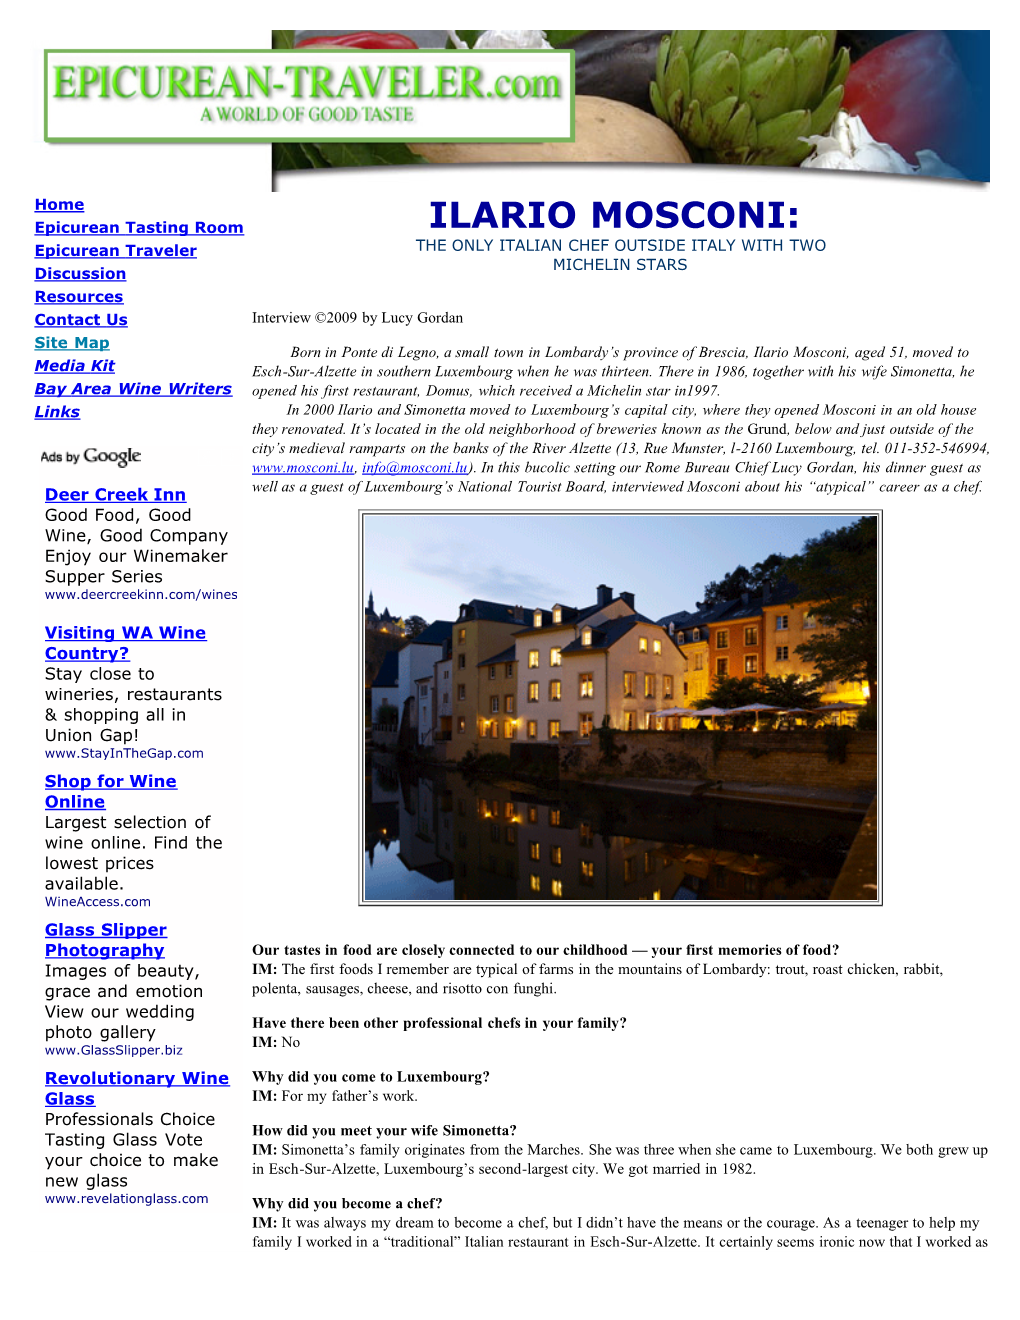 Ilario Mosconi: the Only Italian Chef Outside Italy With